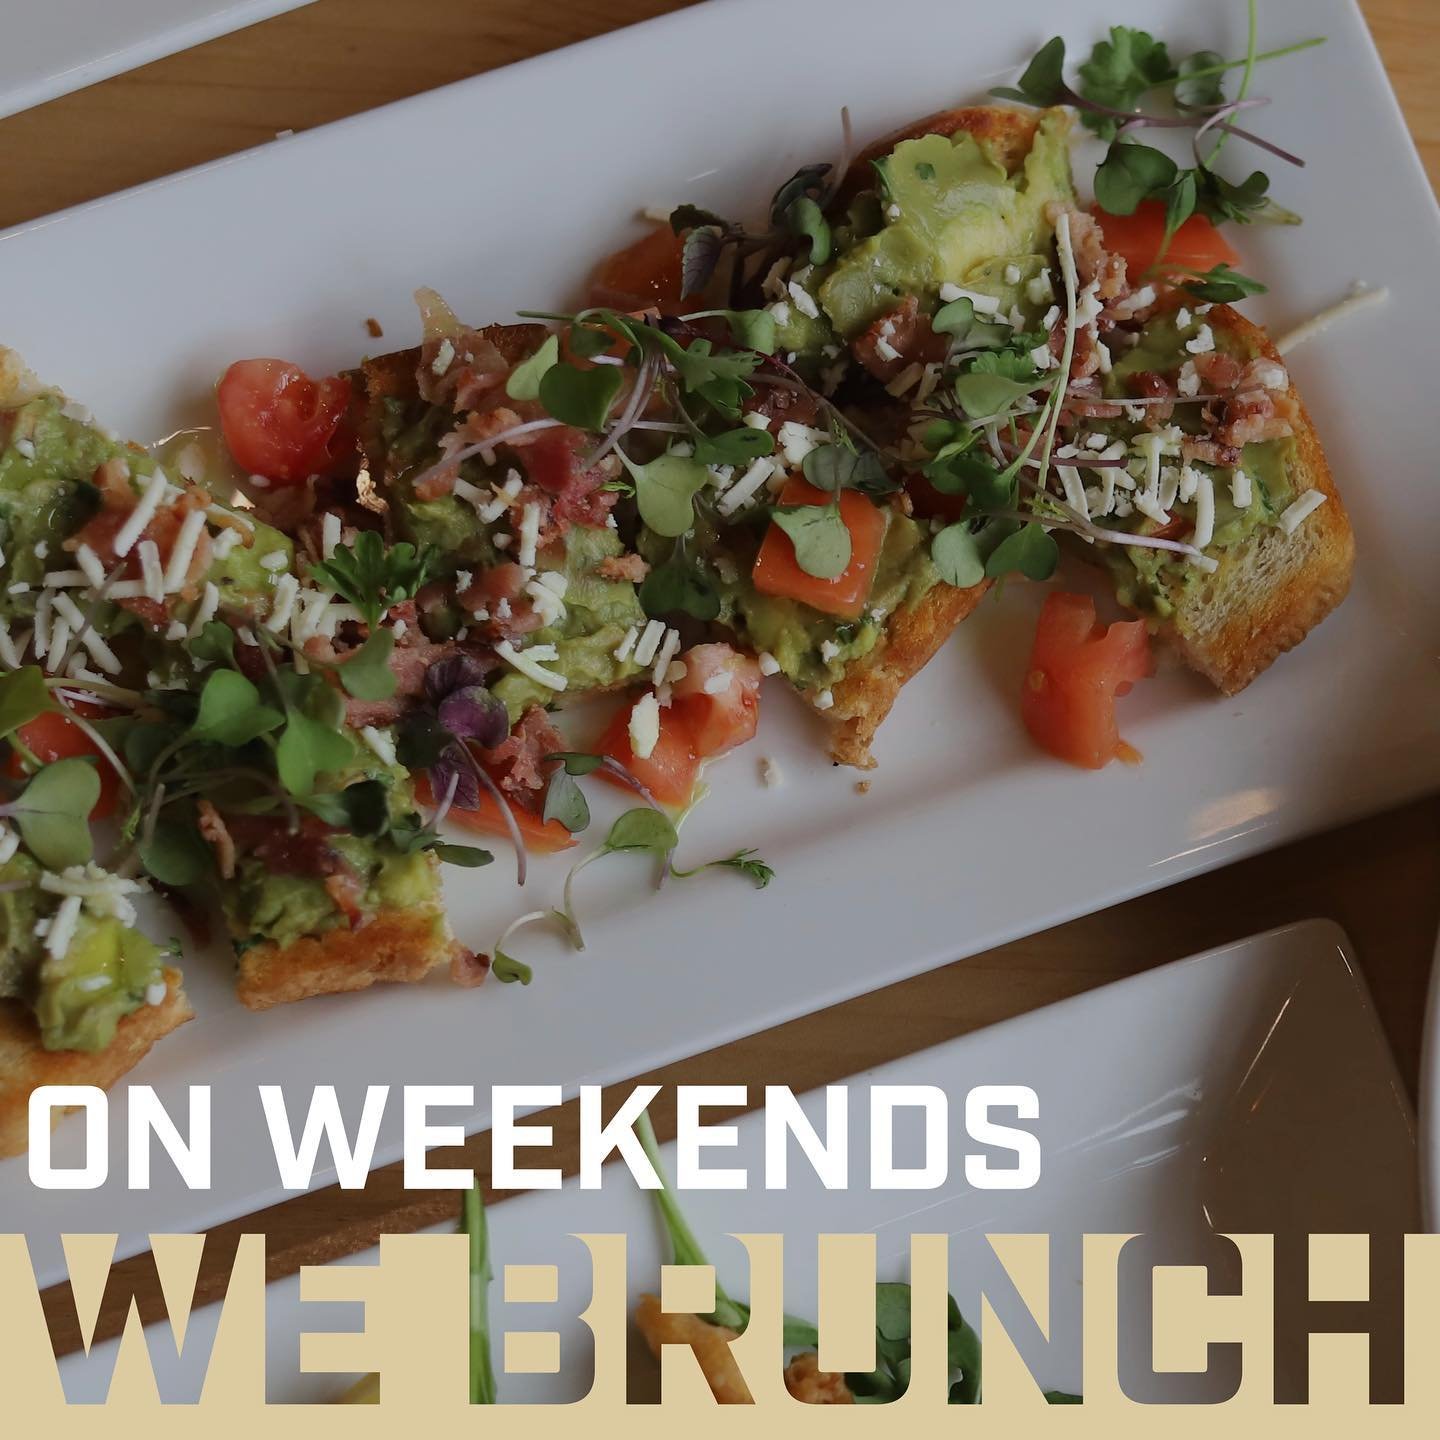 It&rsquo;s (almost) time to BRUNCH!🥞 Start off the big weekend with some Avocado Toast, Eggs Benny, $1 Mimosas, and our house-made  Bloody Mary.👏

View full brunch menu online. And don&rsquo;t forget to join us for our Cinco De Mayo specials all we